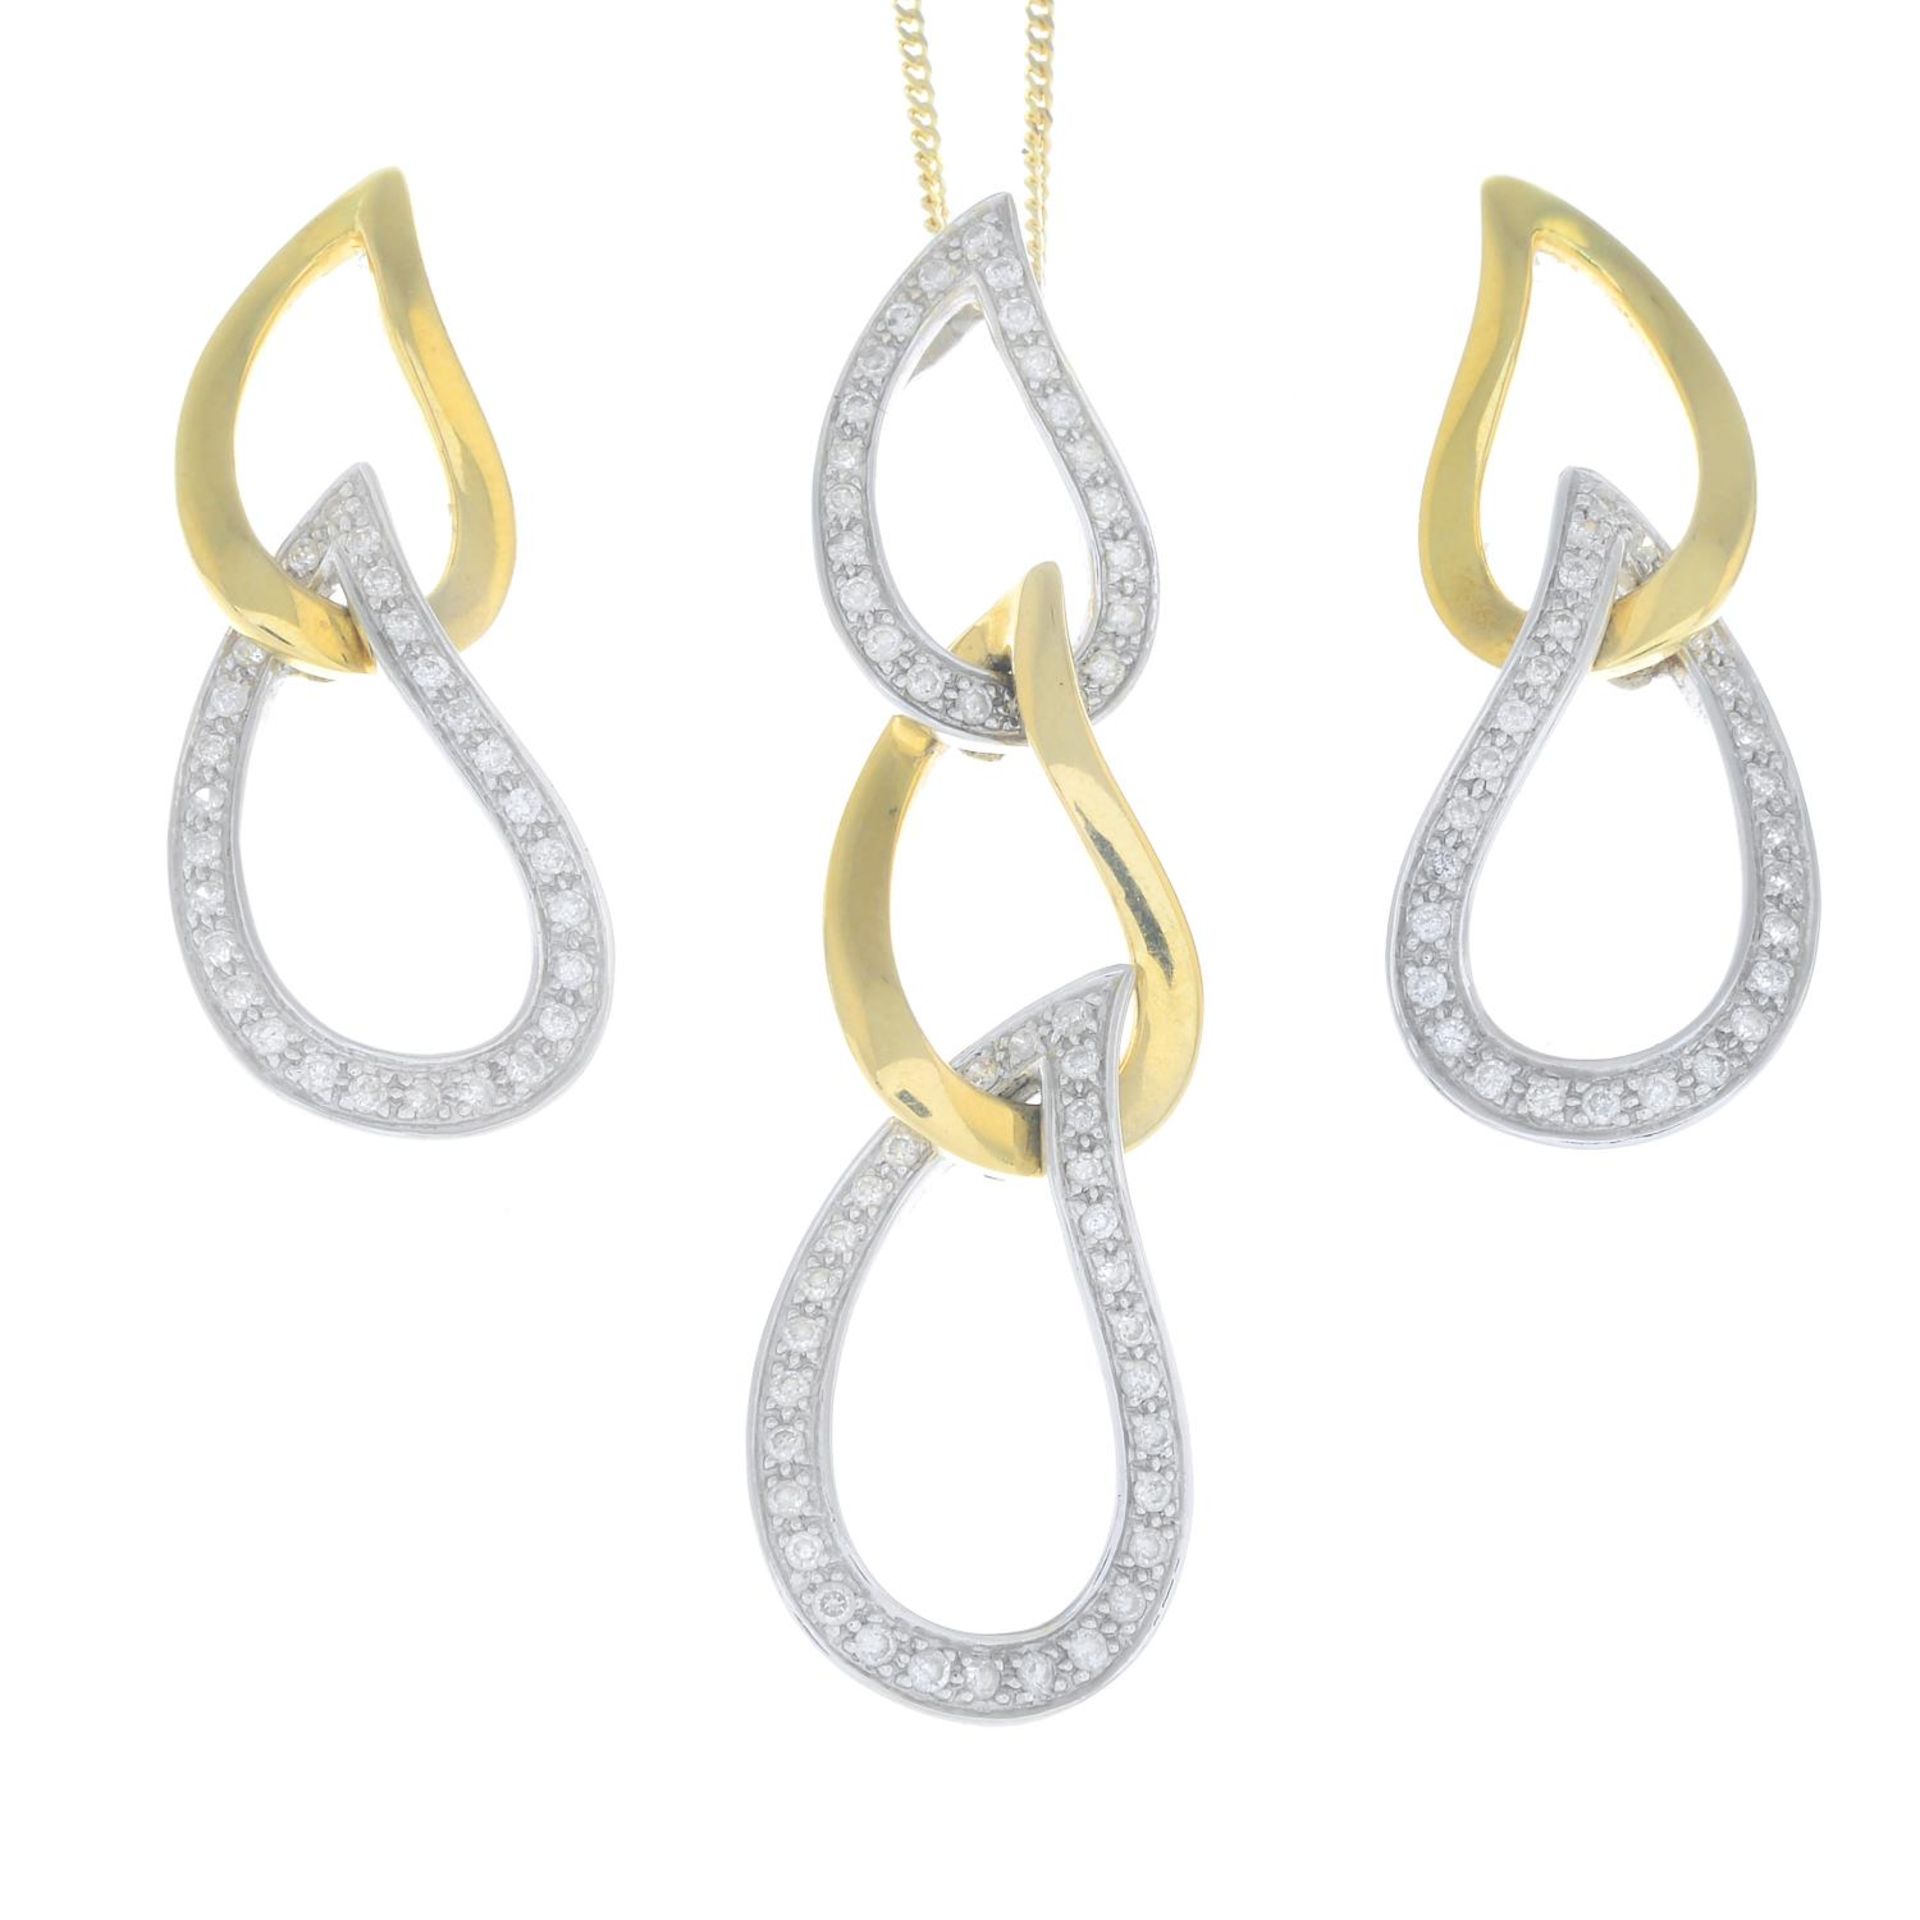 A set of diamond jewellery, to include a pair of earrings and matching necklace.